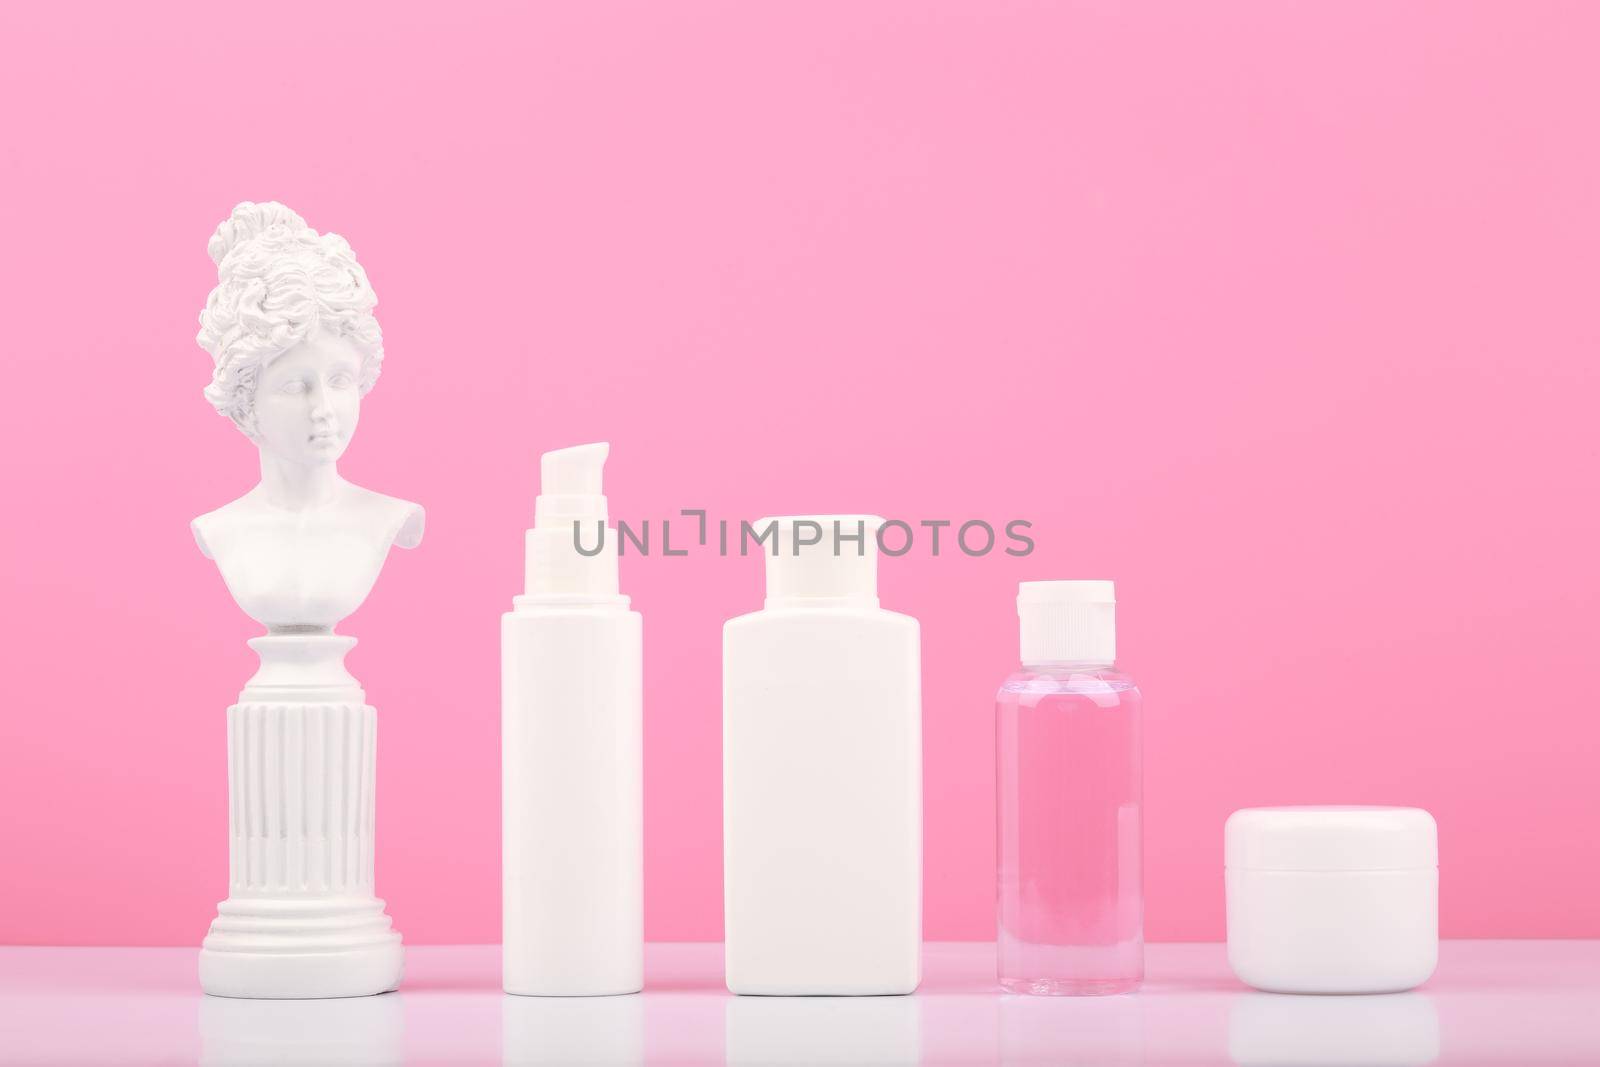 Set of beauty products for daily skin care on white table against bright pink background with white gypsum statue by Senorina_Irina